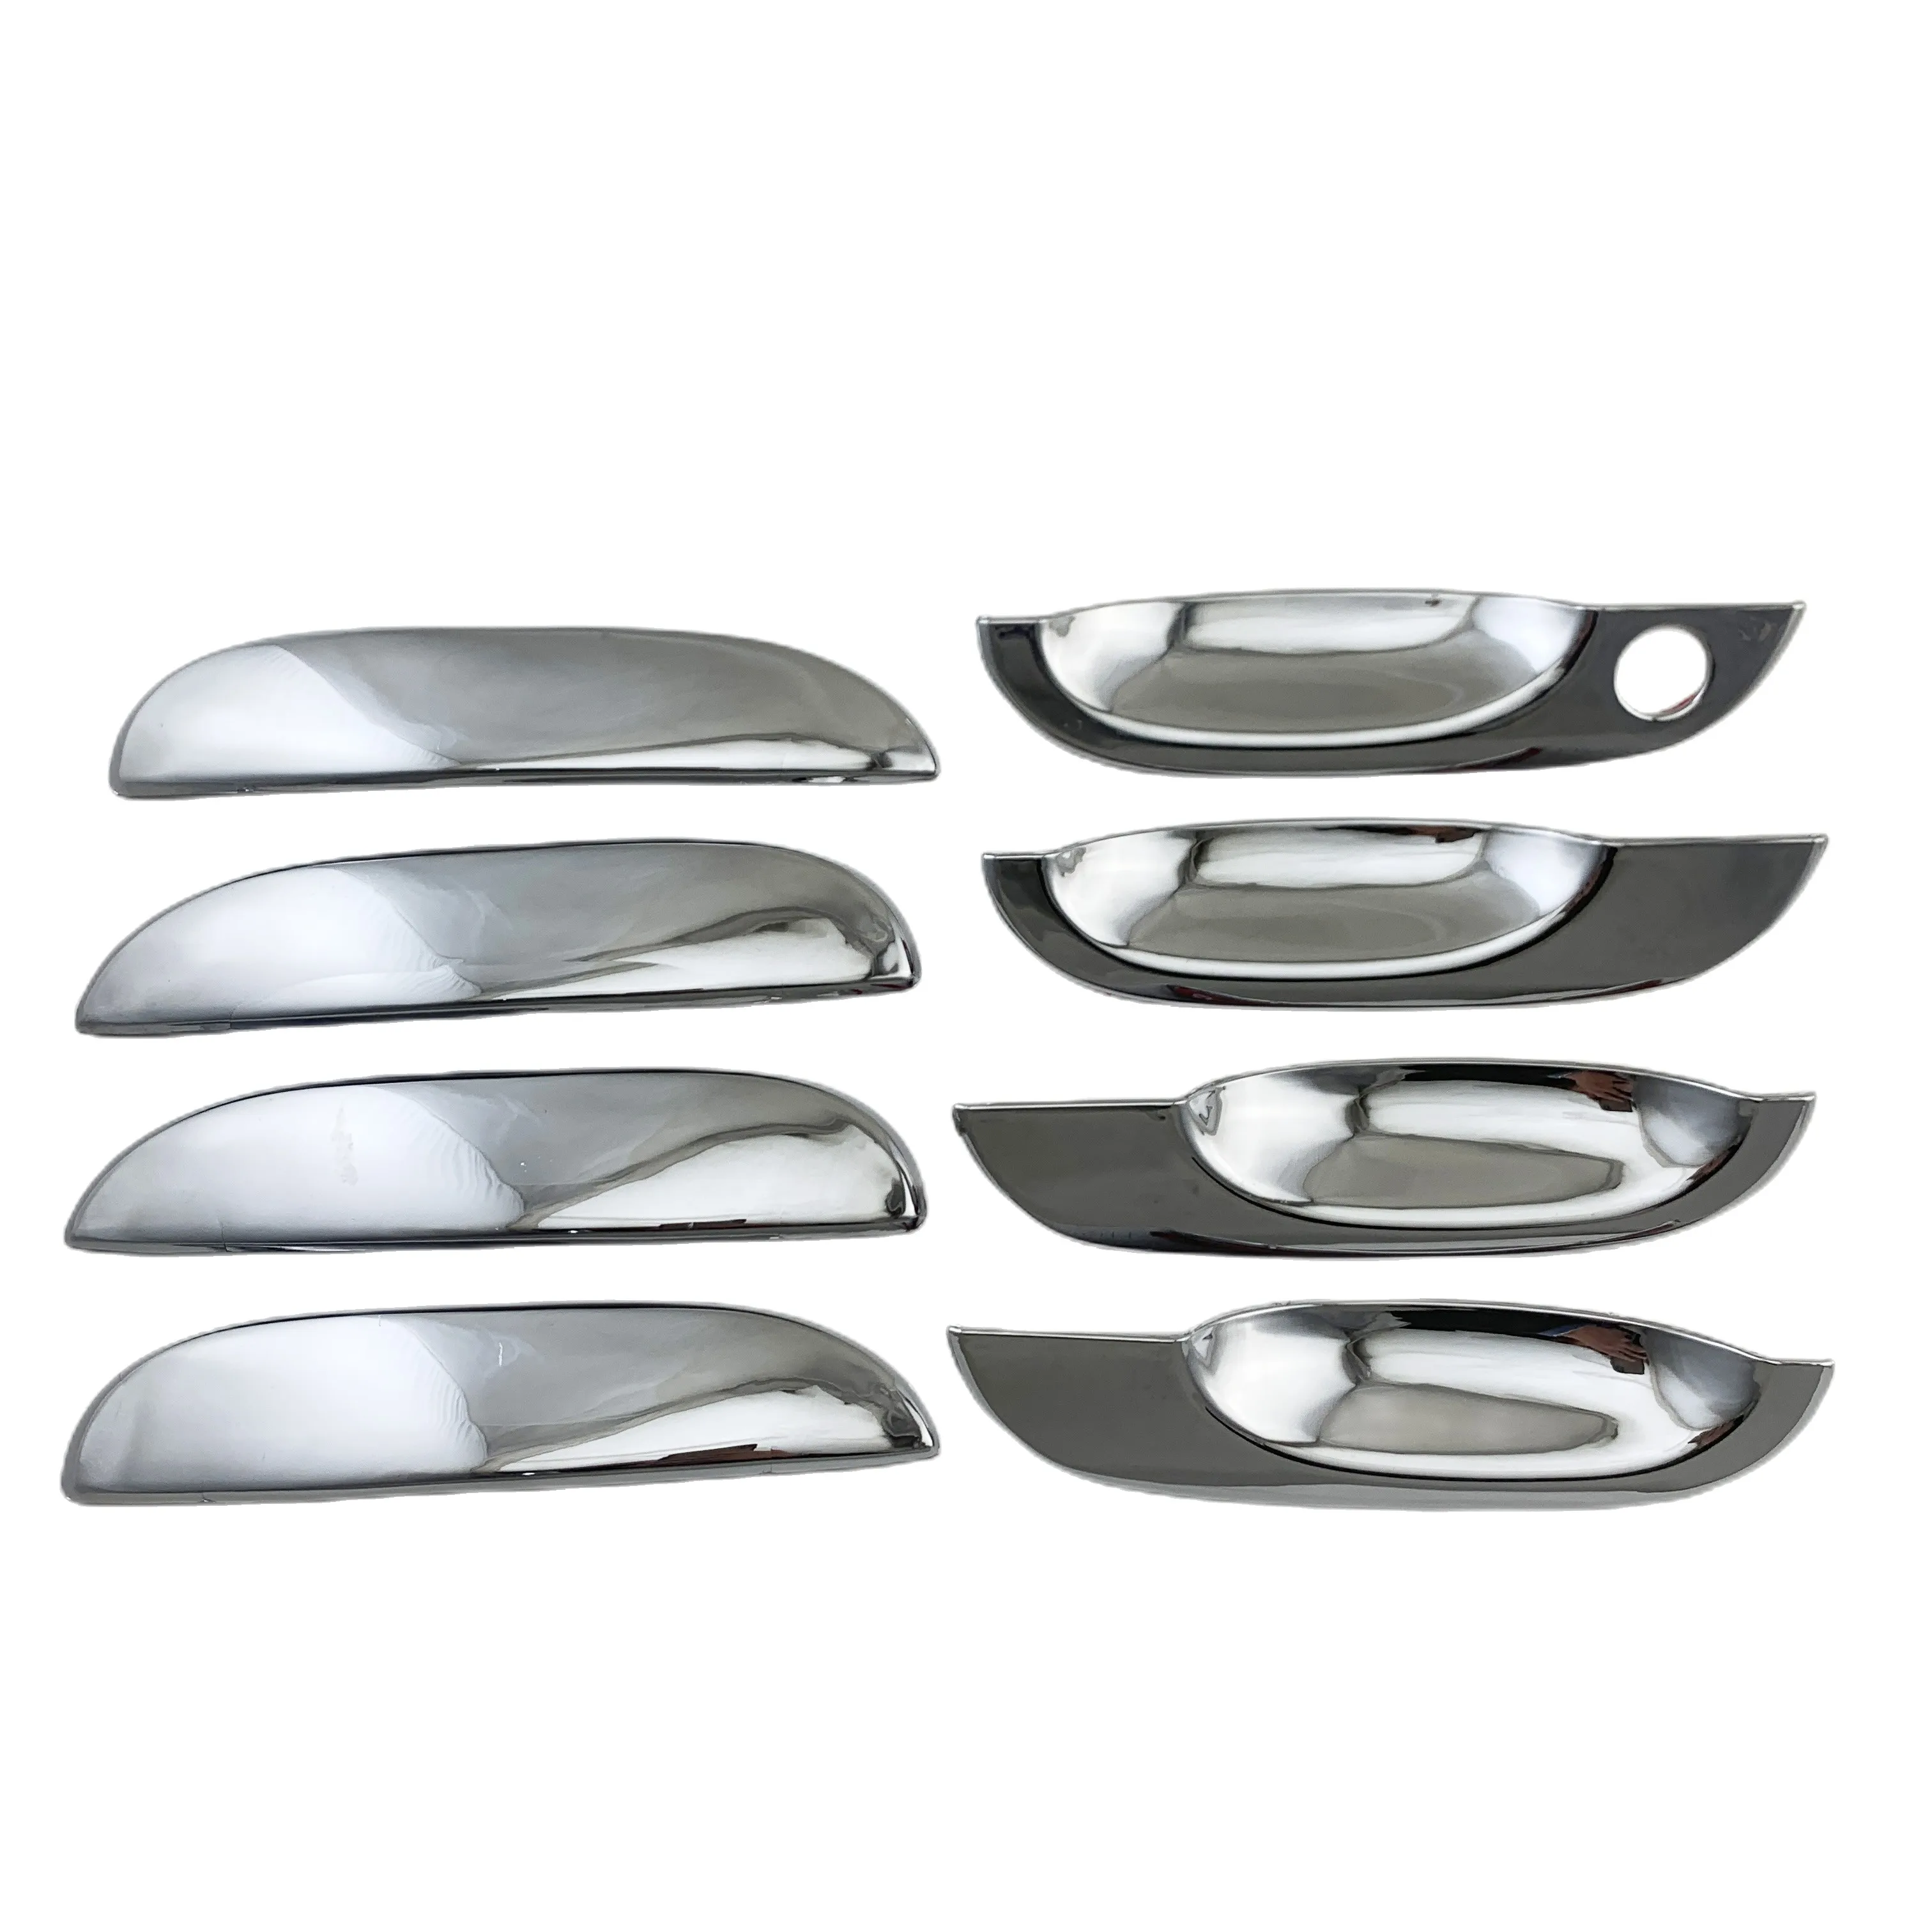 1996-2004 For BMW E38 728 730 E39 520 530 Door Handle Covers ABS Chrome Accessories Stickers Car Styling（Left-hand Drive）